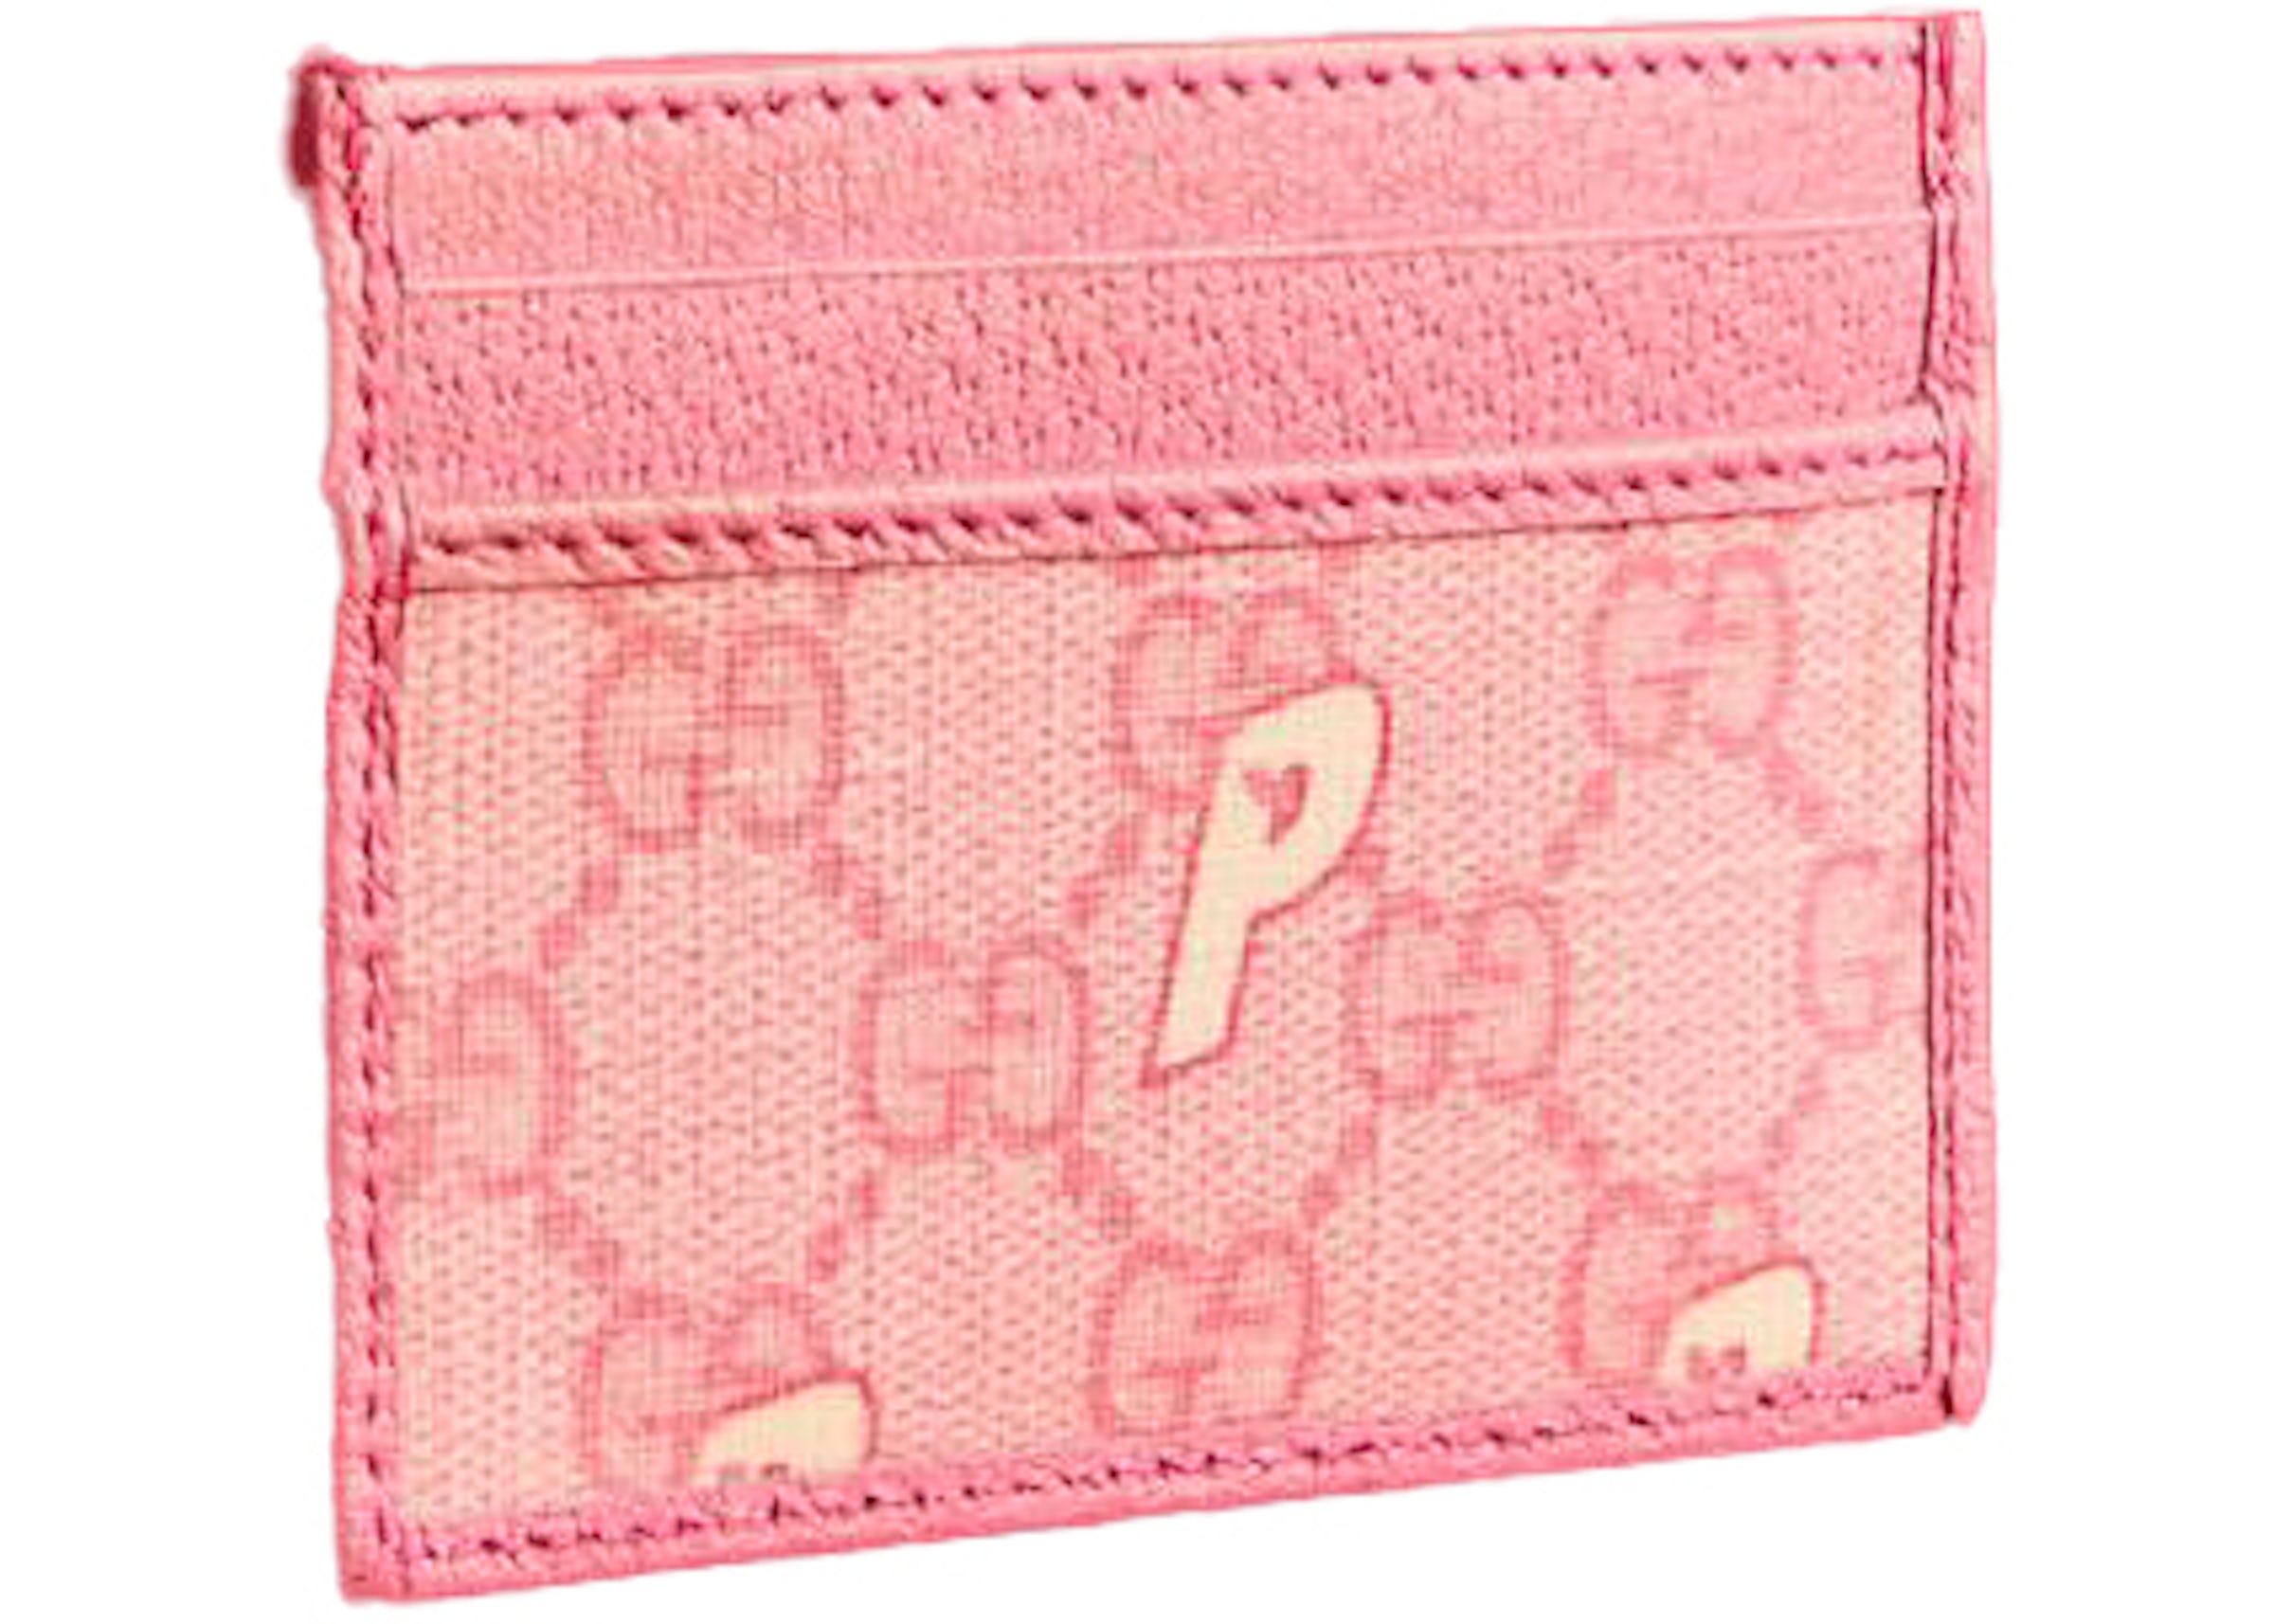 Palace x Gucci GG-P Supreme Card Case Pale Pink in GG Supreme Canvas - US